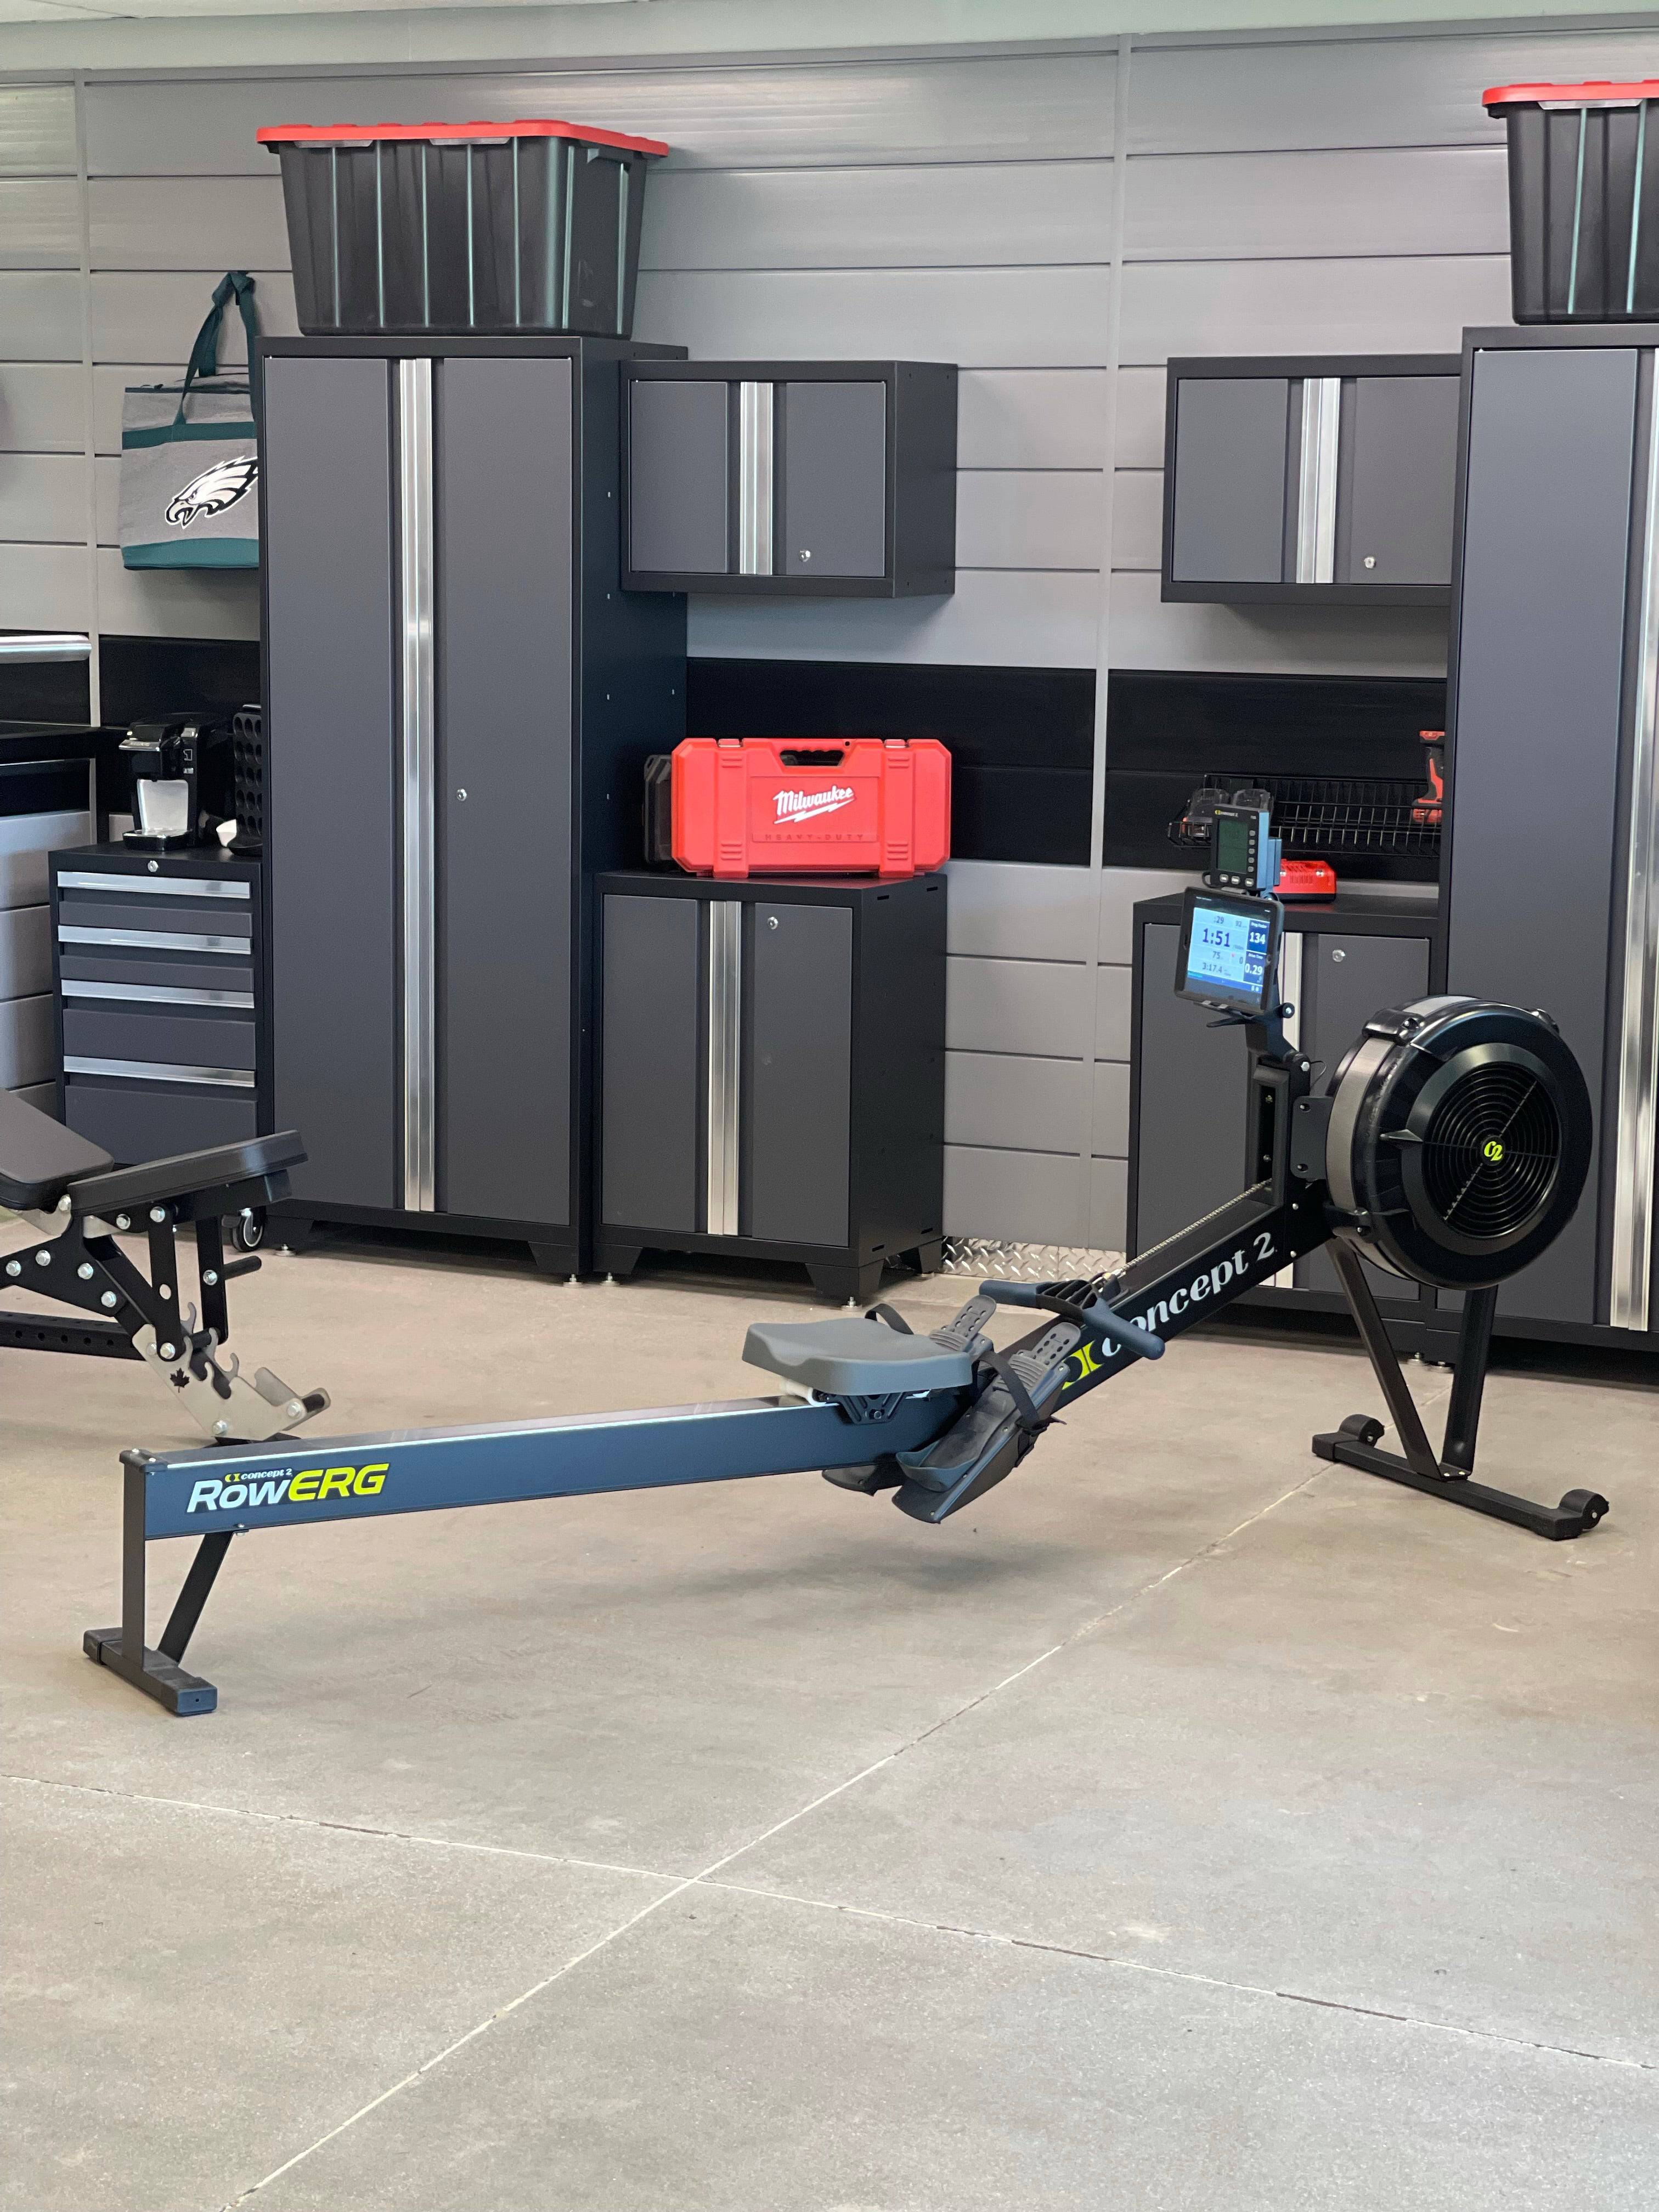 Concept2 | Indoor Rower - RowErg with Standard Legs - PM5 - XTC Fitness - Exercise Equipment Superstore - Canada - Rower